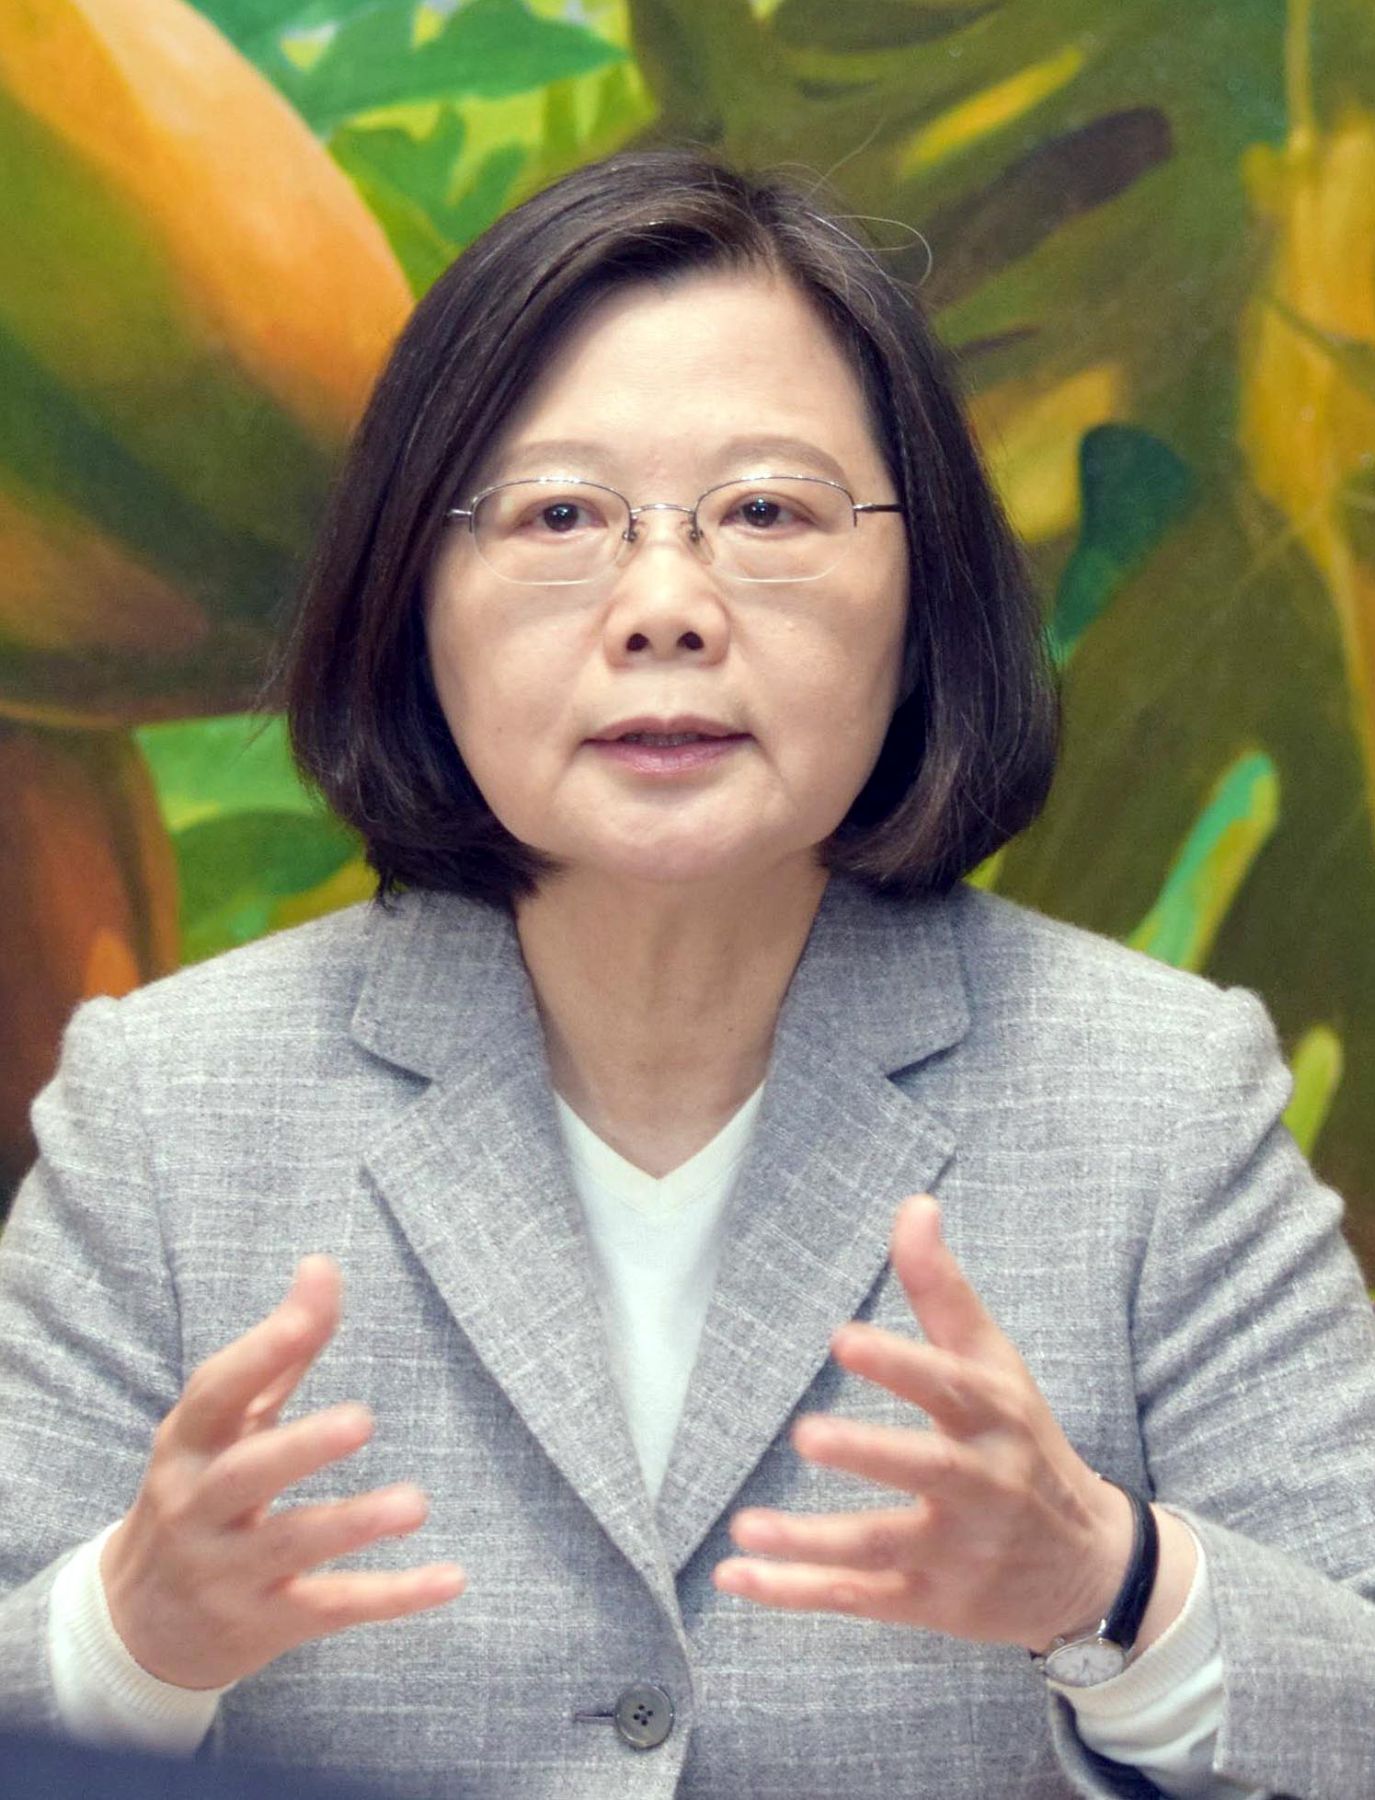 EXCLUSIVE INTERVIEW | Taiwan’s President Tsai Ing-wen Seeks Security Talks with Japanese Government